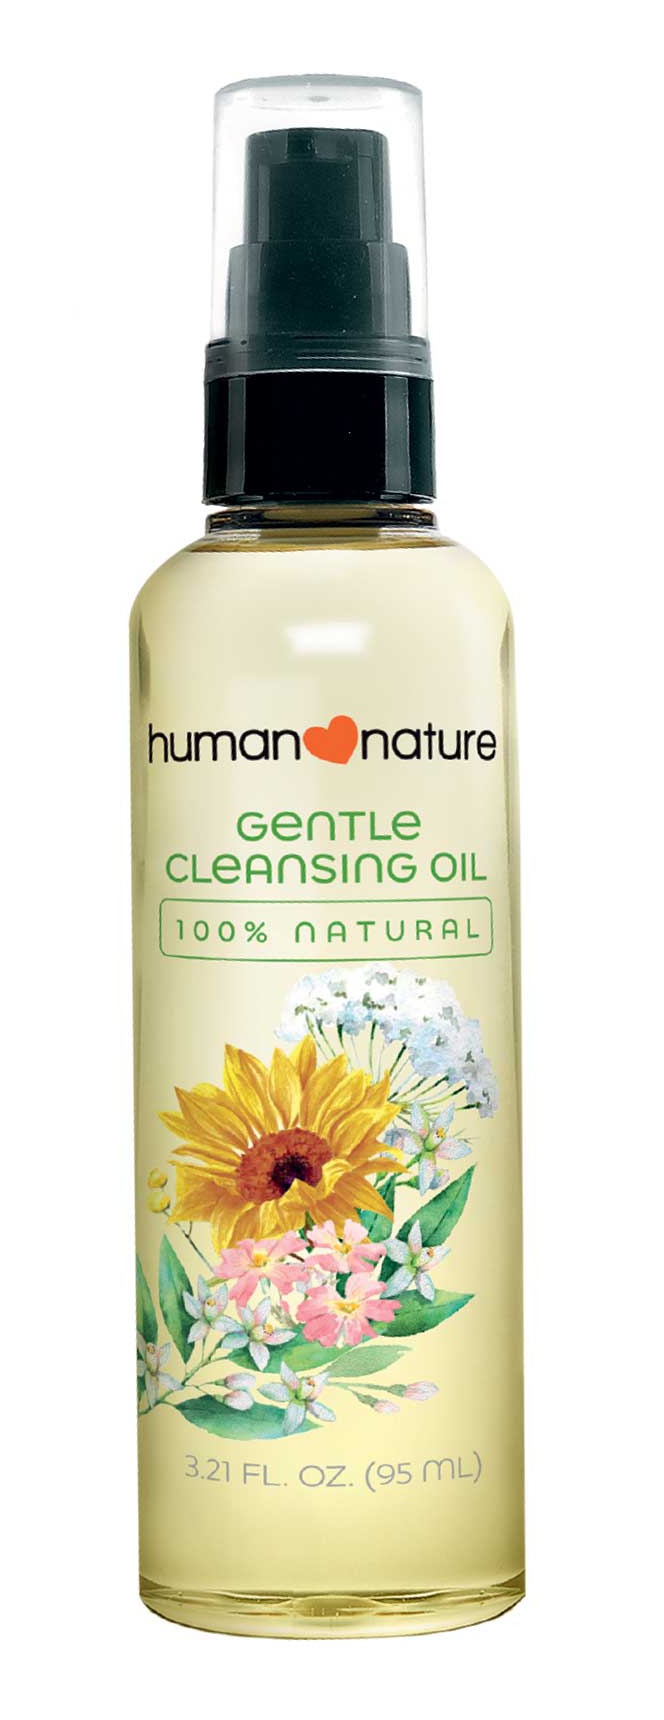 Human Heart Nature Gentle Cleansing Oil